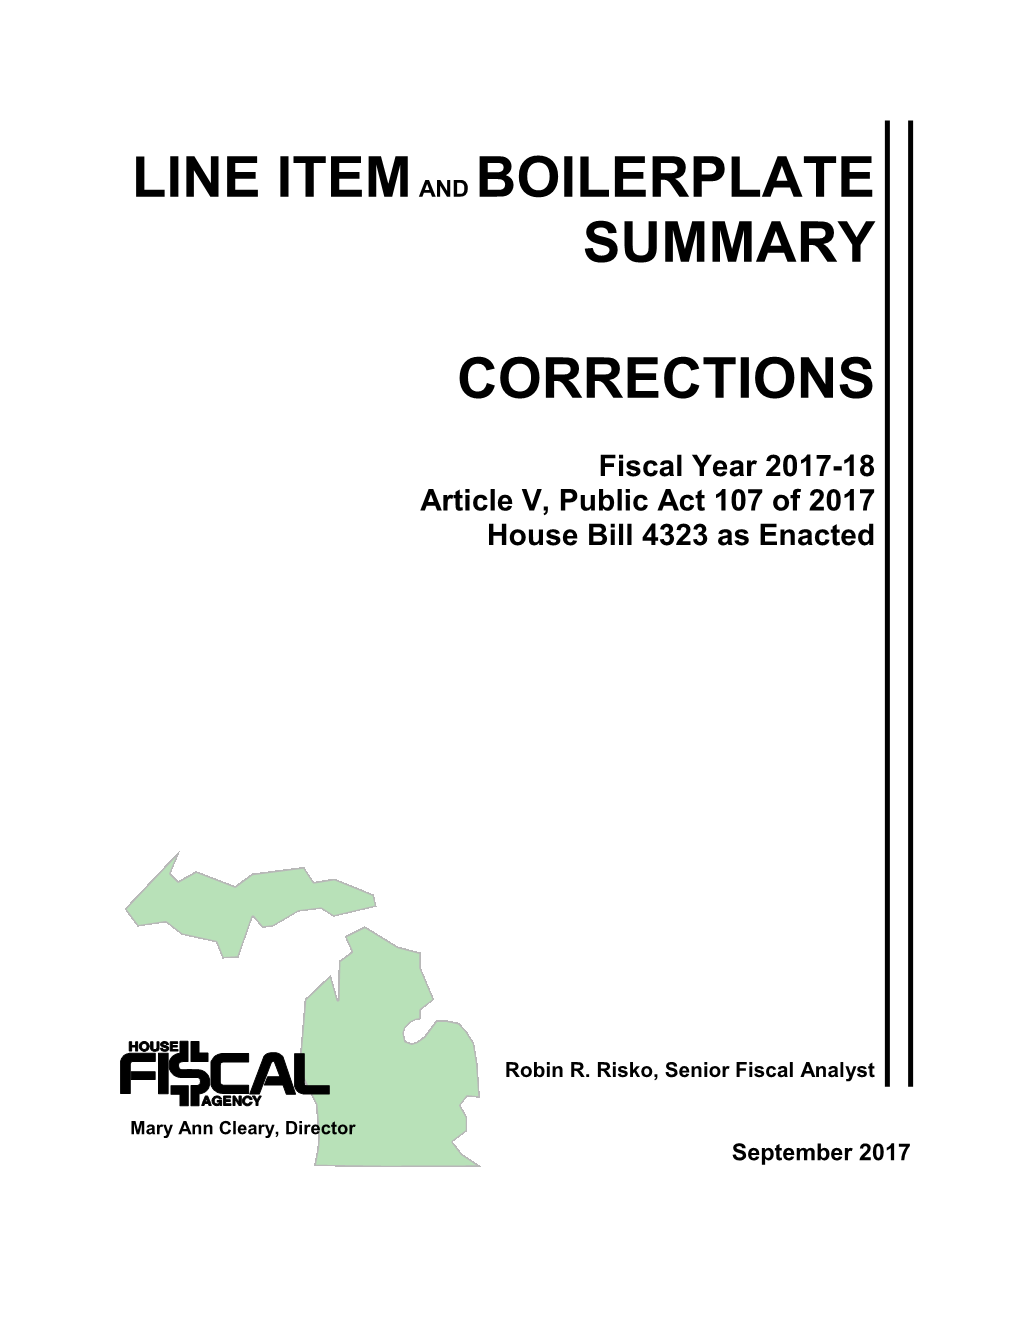 Line Item and Boilerplate Summary: Corrections